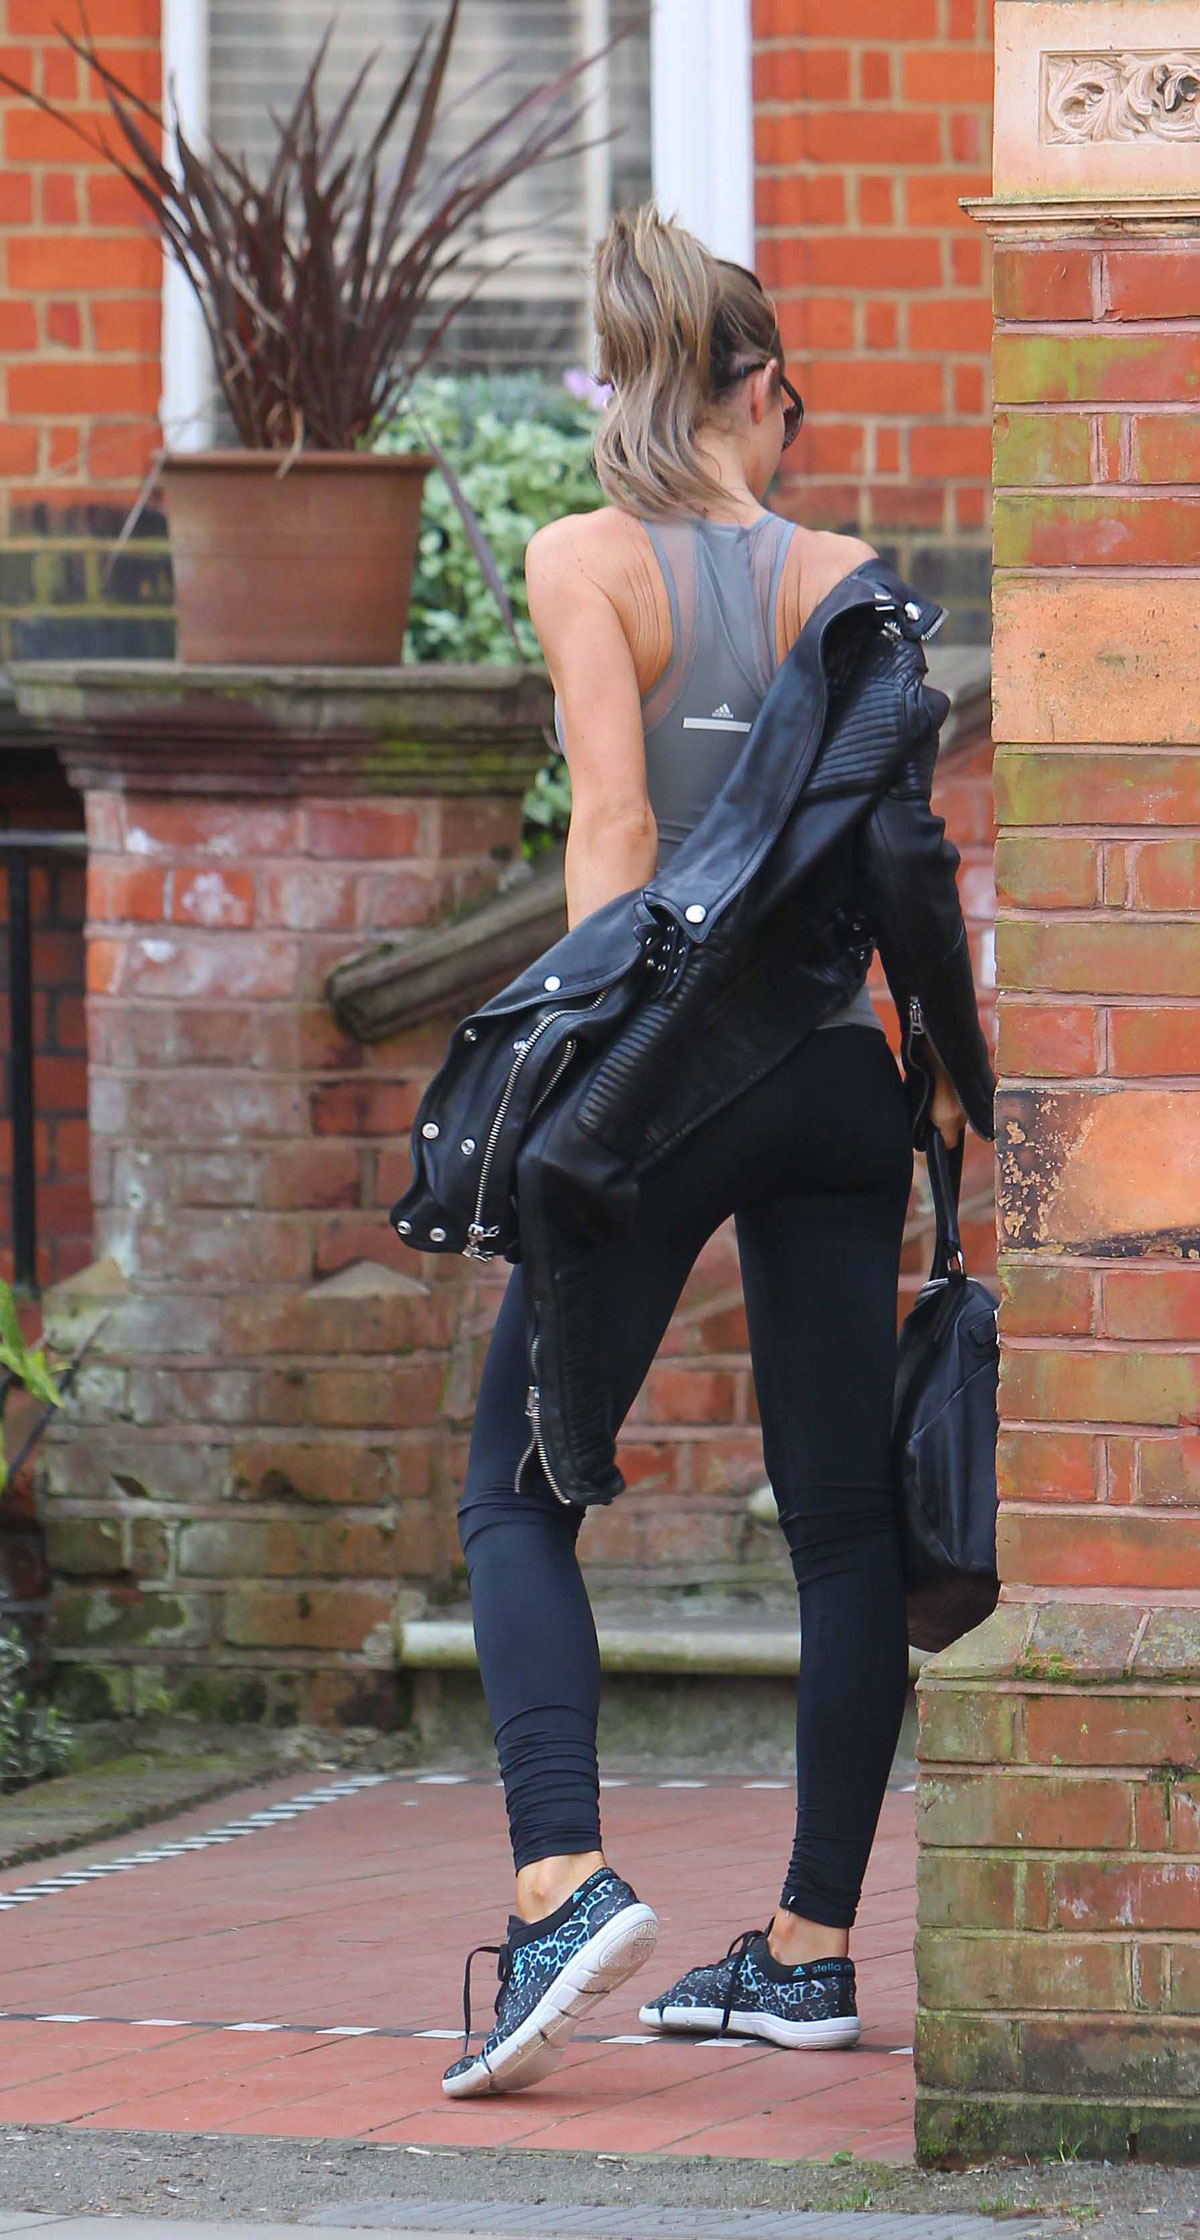 Abbey Clancy leaves her central London home to go to the gym